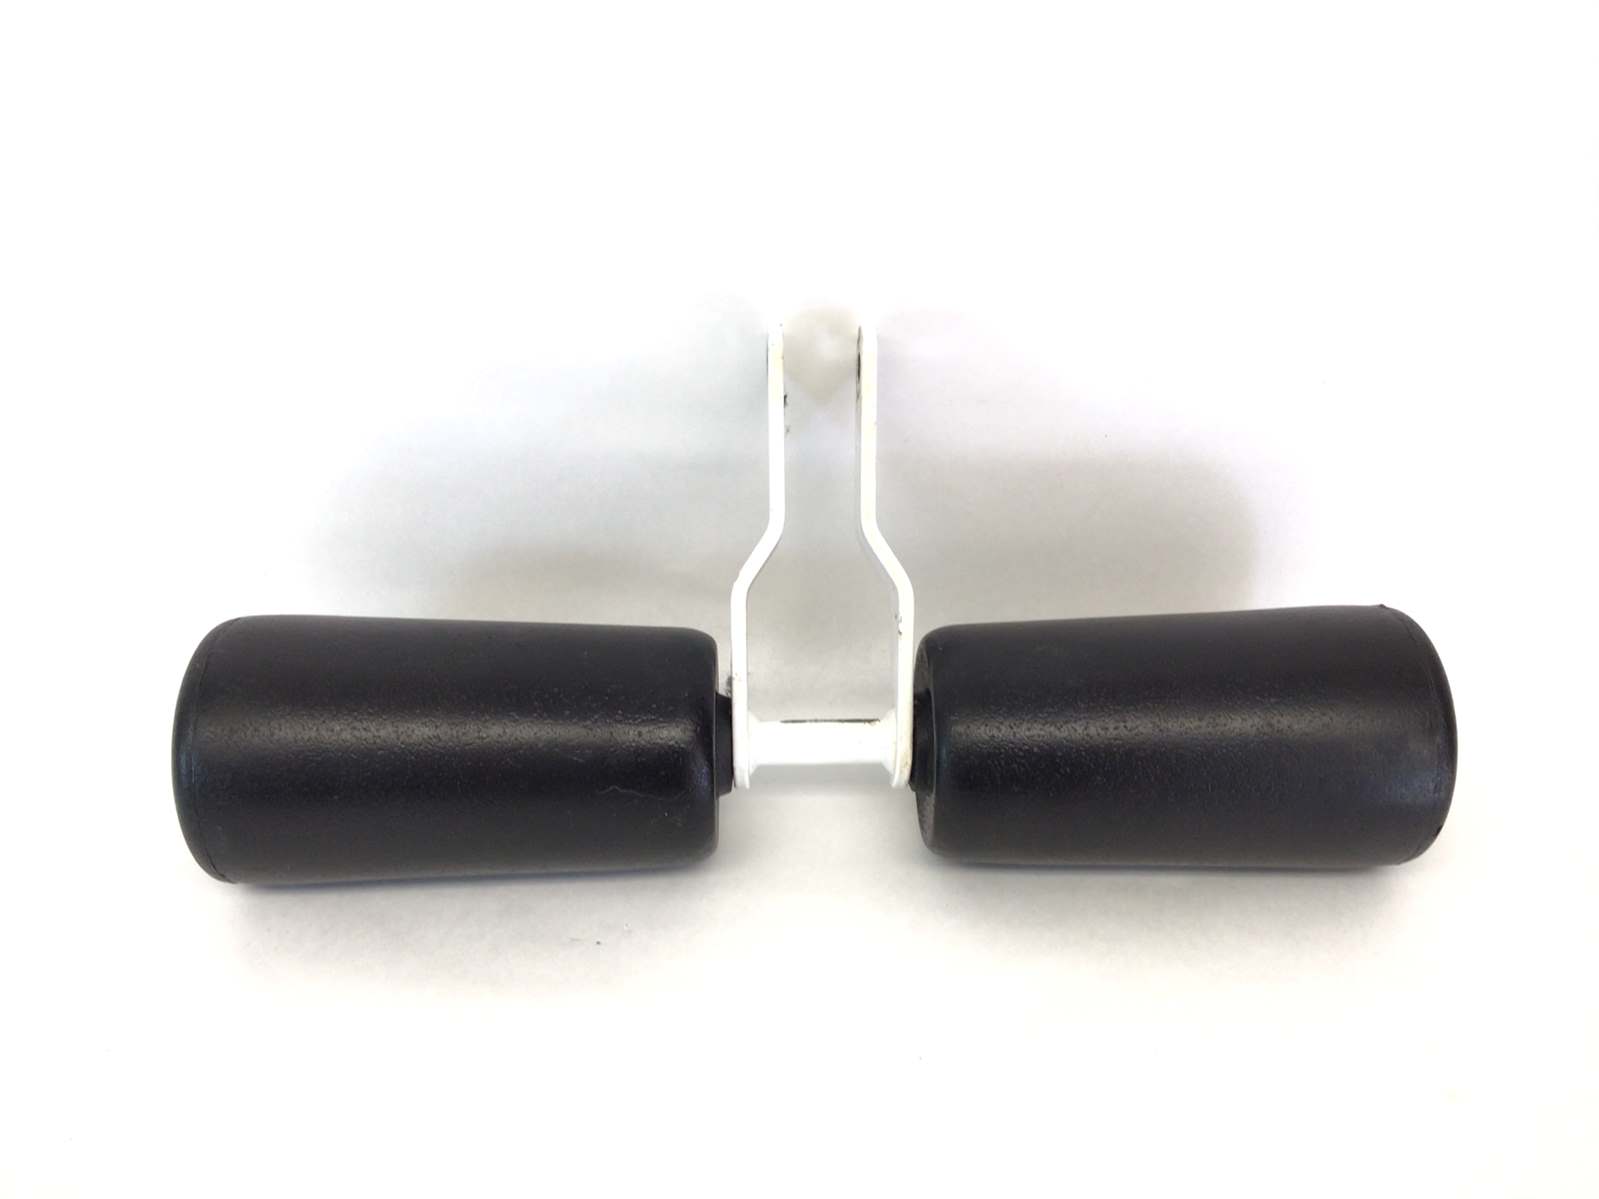 Leg Curl Leg Extension Roller Pad Assembly (Used)